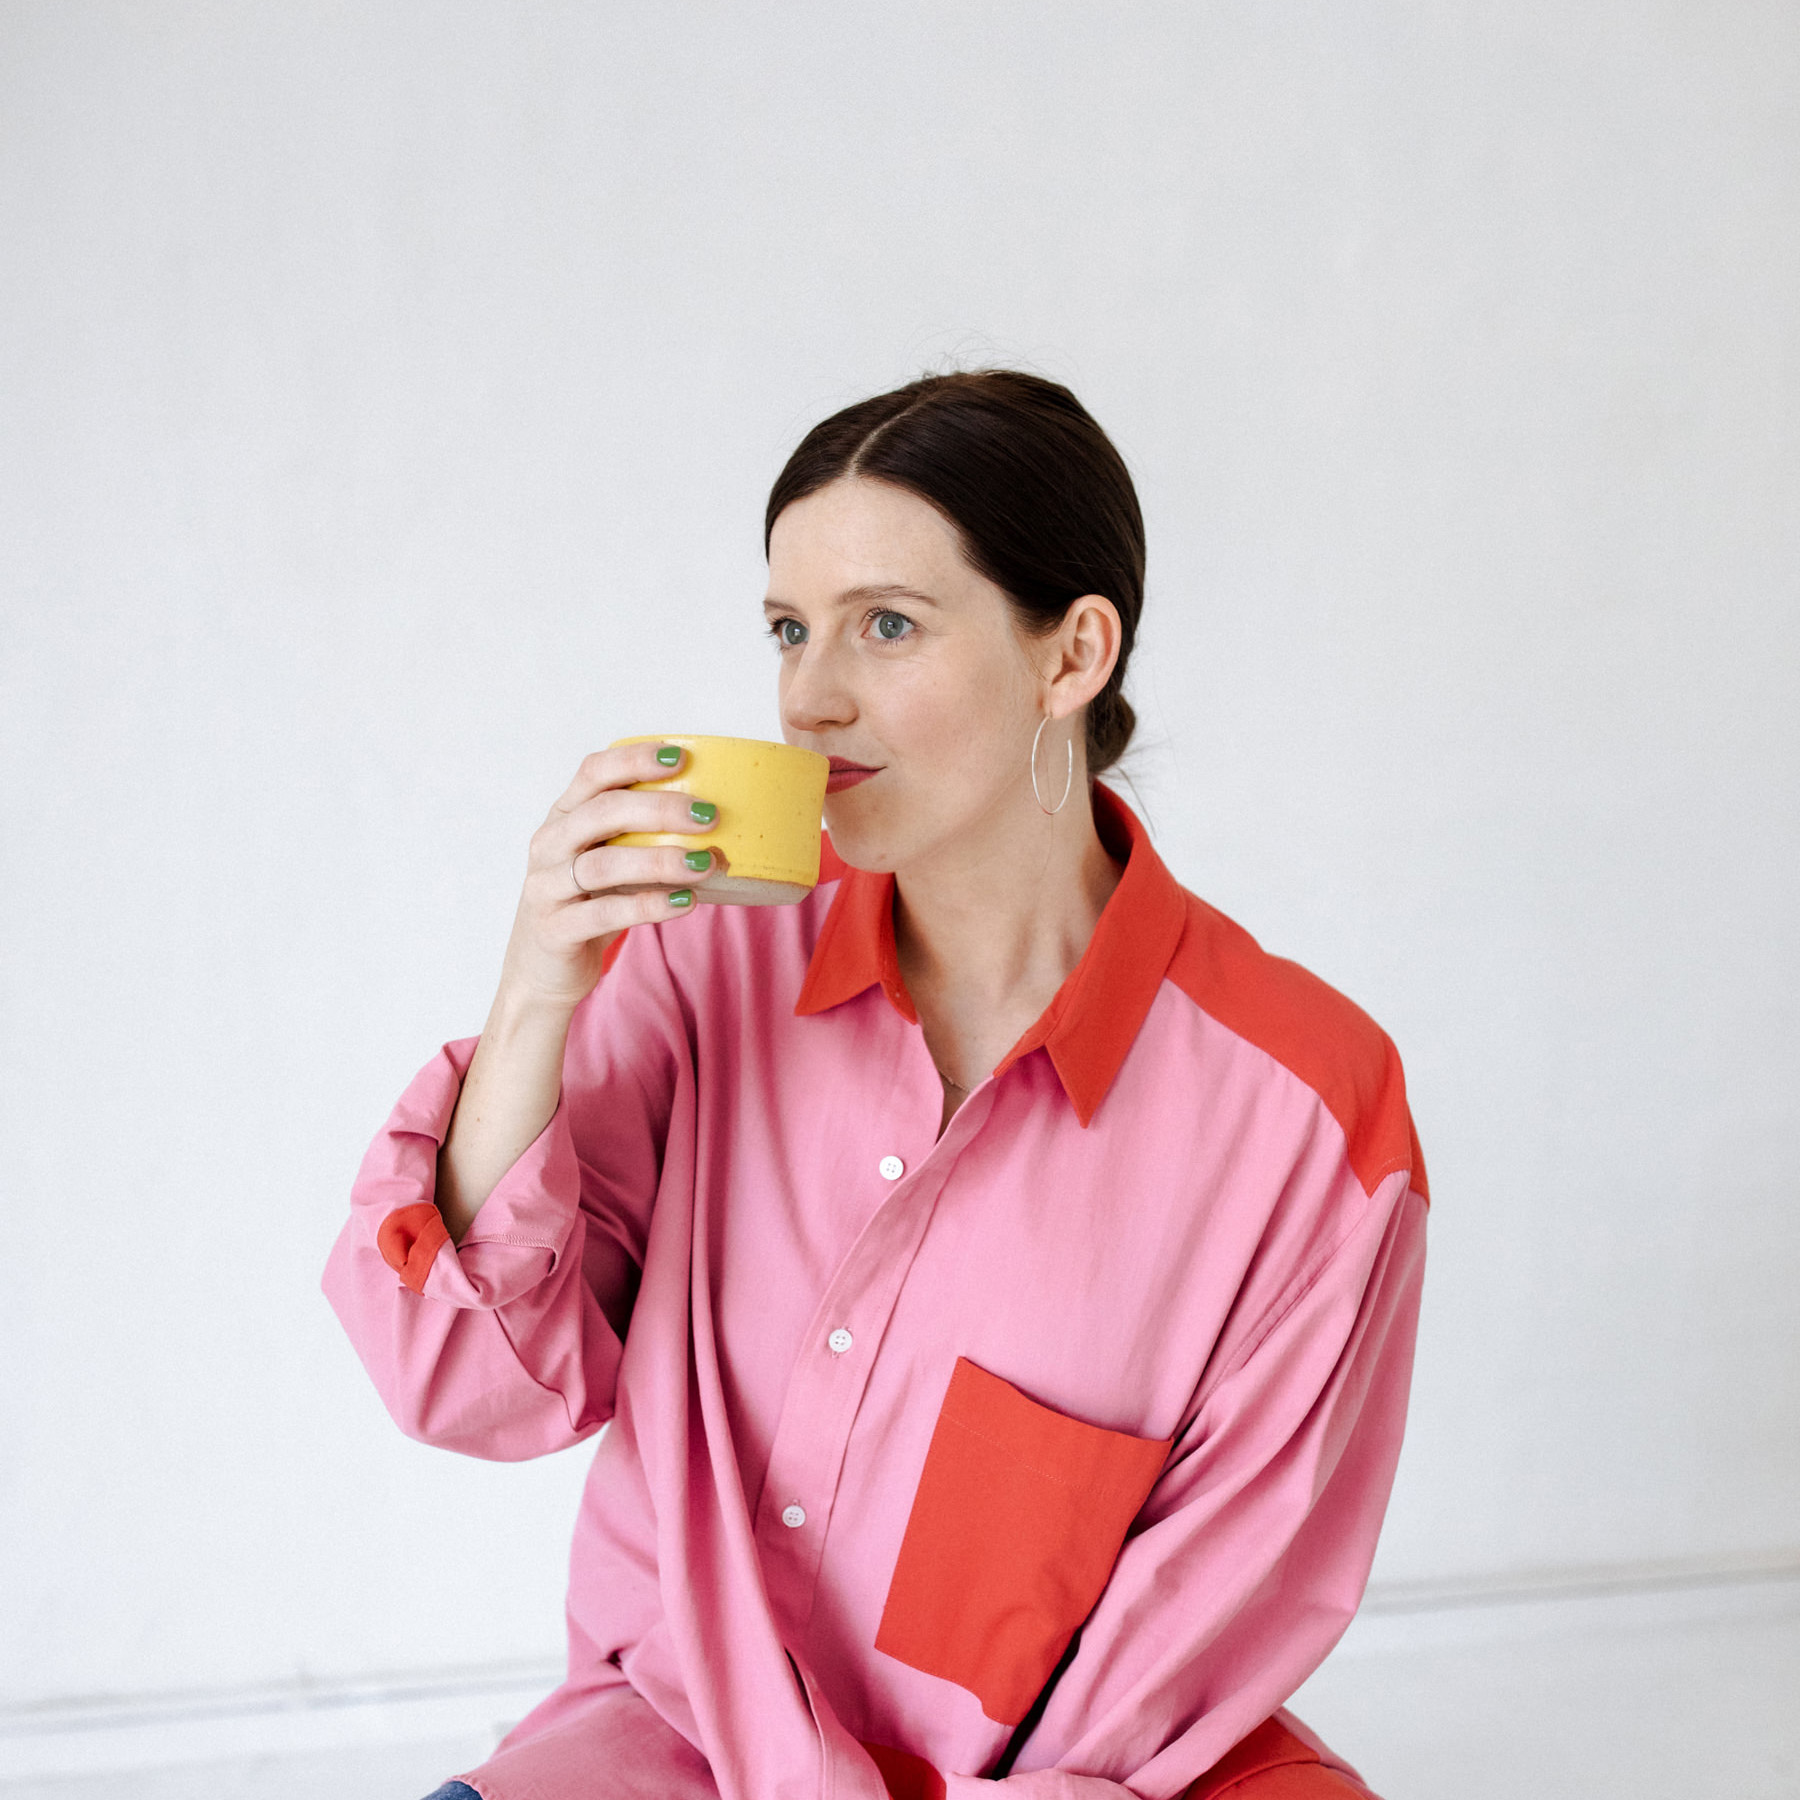 sun mother studio amy pearson pink shirt yellow cup